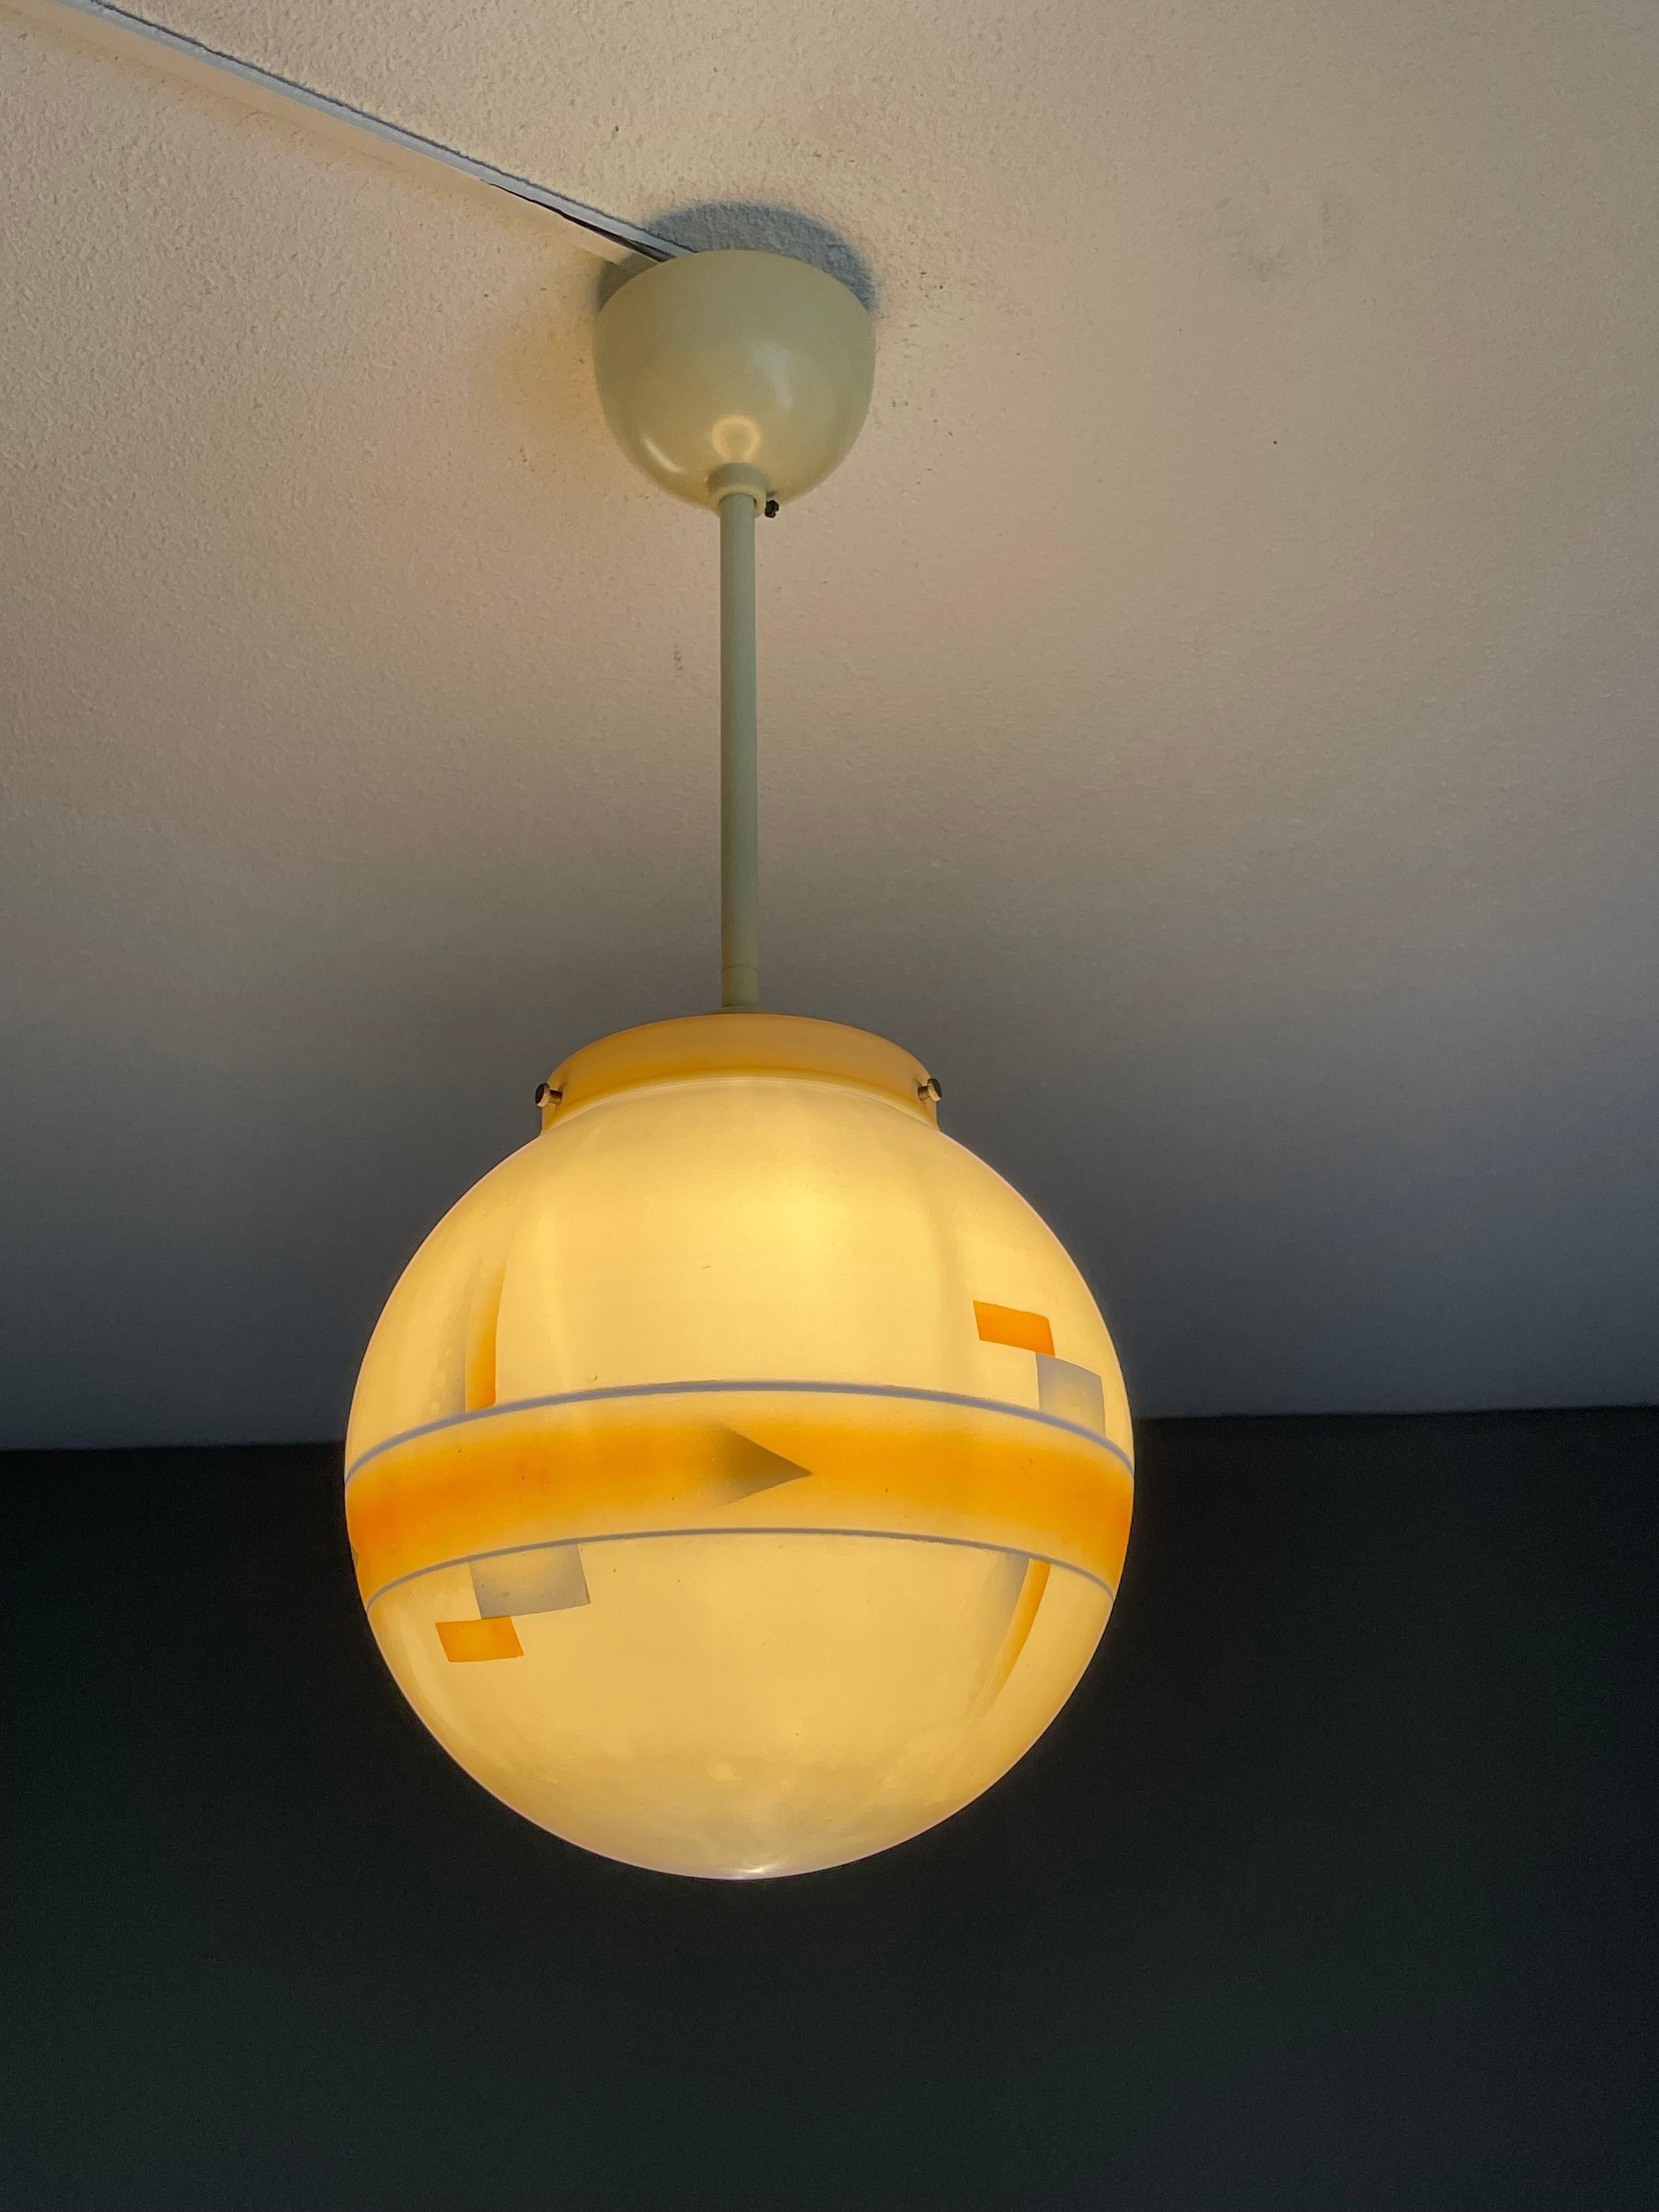 Handcrafted glass globe Art Deco pendant with colored geometrical patterns.

This rare combination of materials Art Deco pendant or flush mount is in excellent condition and a real joy to own and look at. This quality crafted antique light fixture